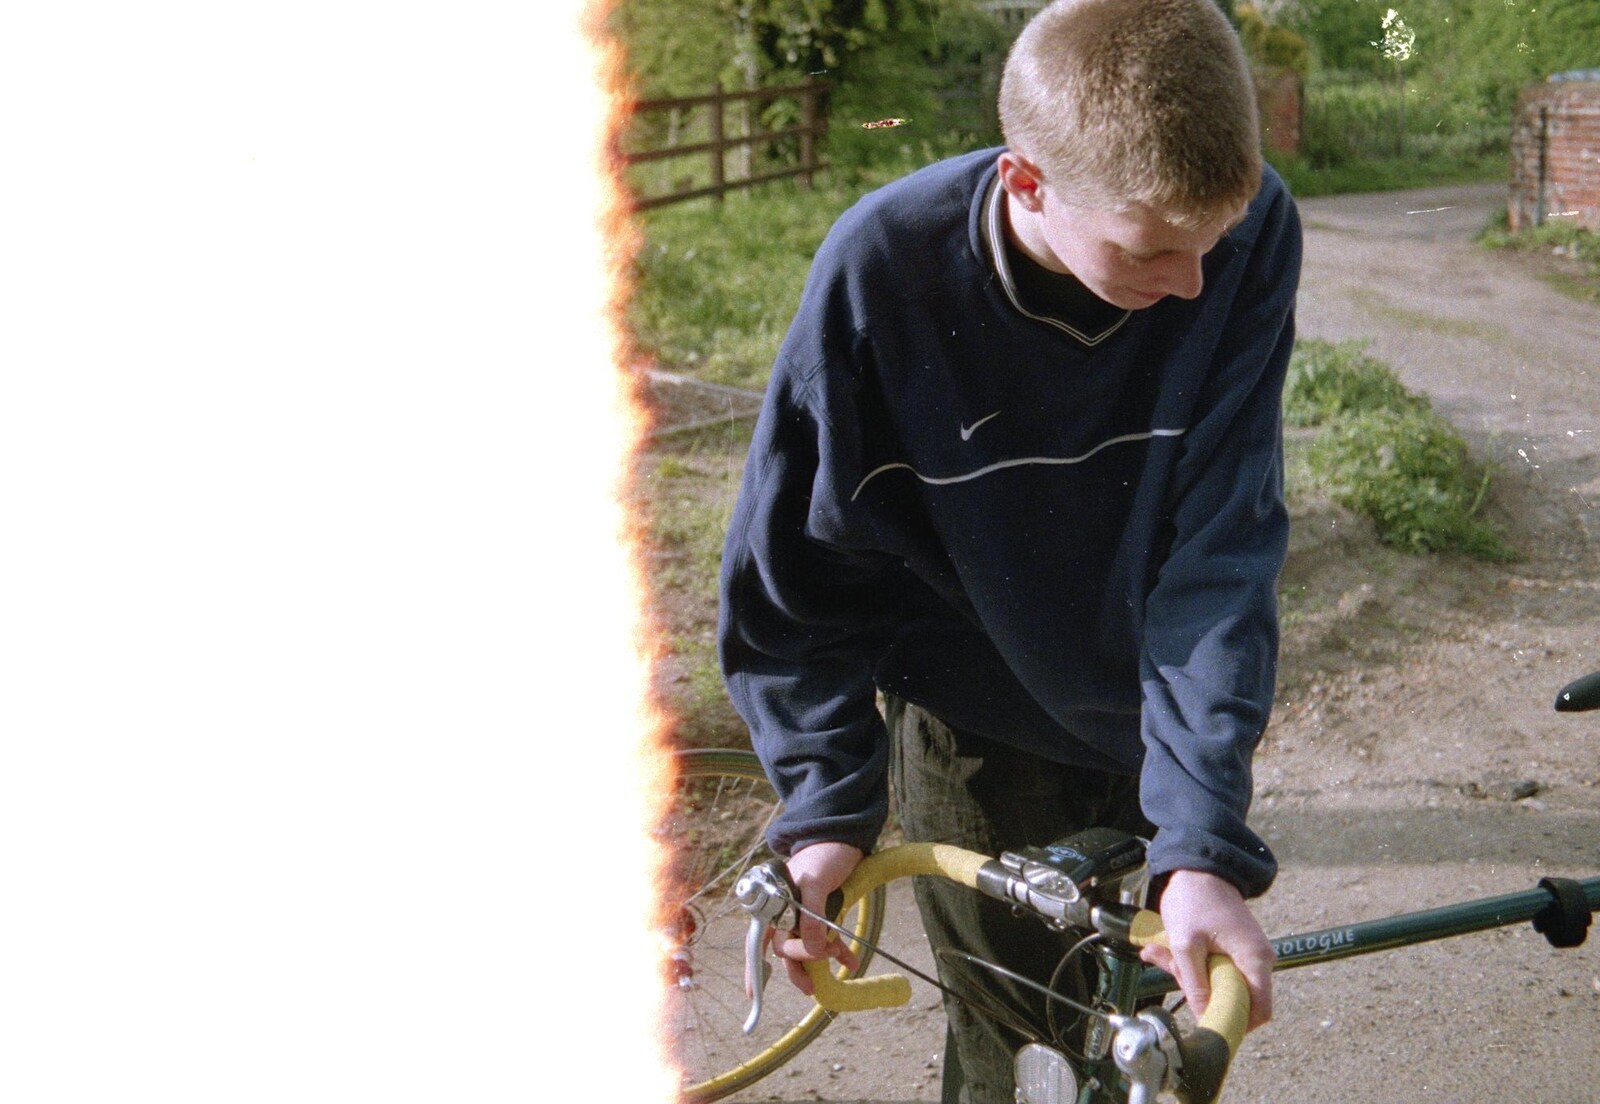 The Boy Phil gets off his bike from A BSCC Bike Ride, Brockdish Greyhound and Hoxne Swan, Suffolk - 4th May 2000